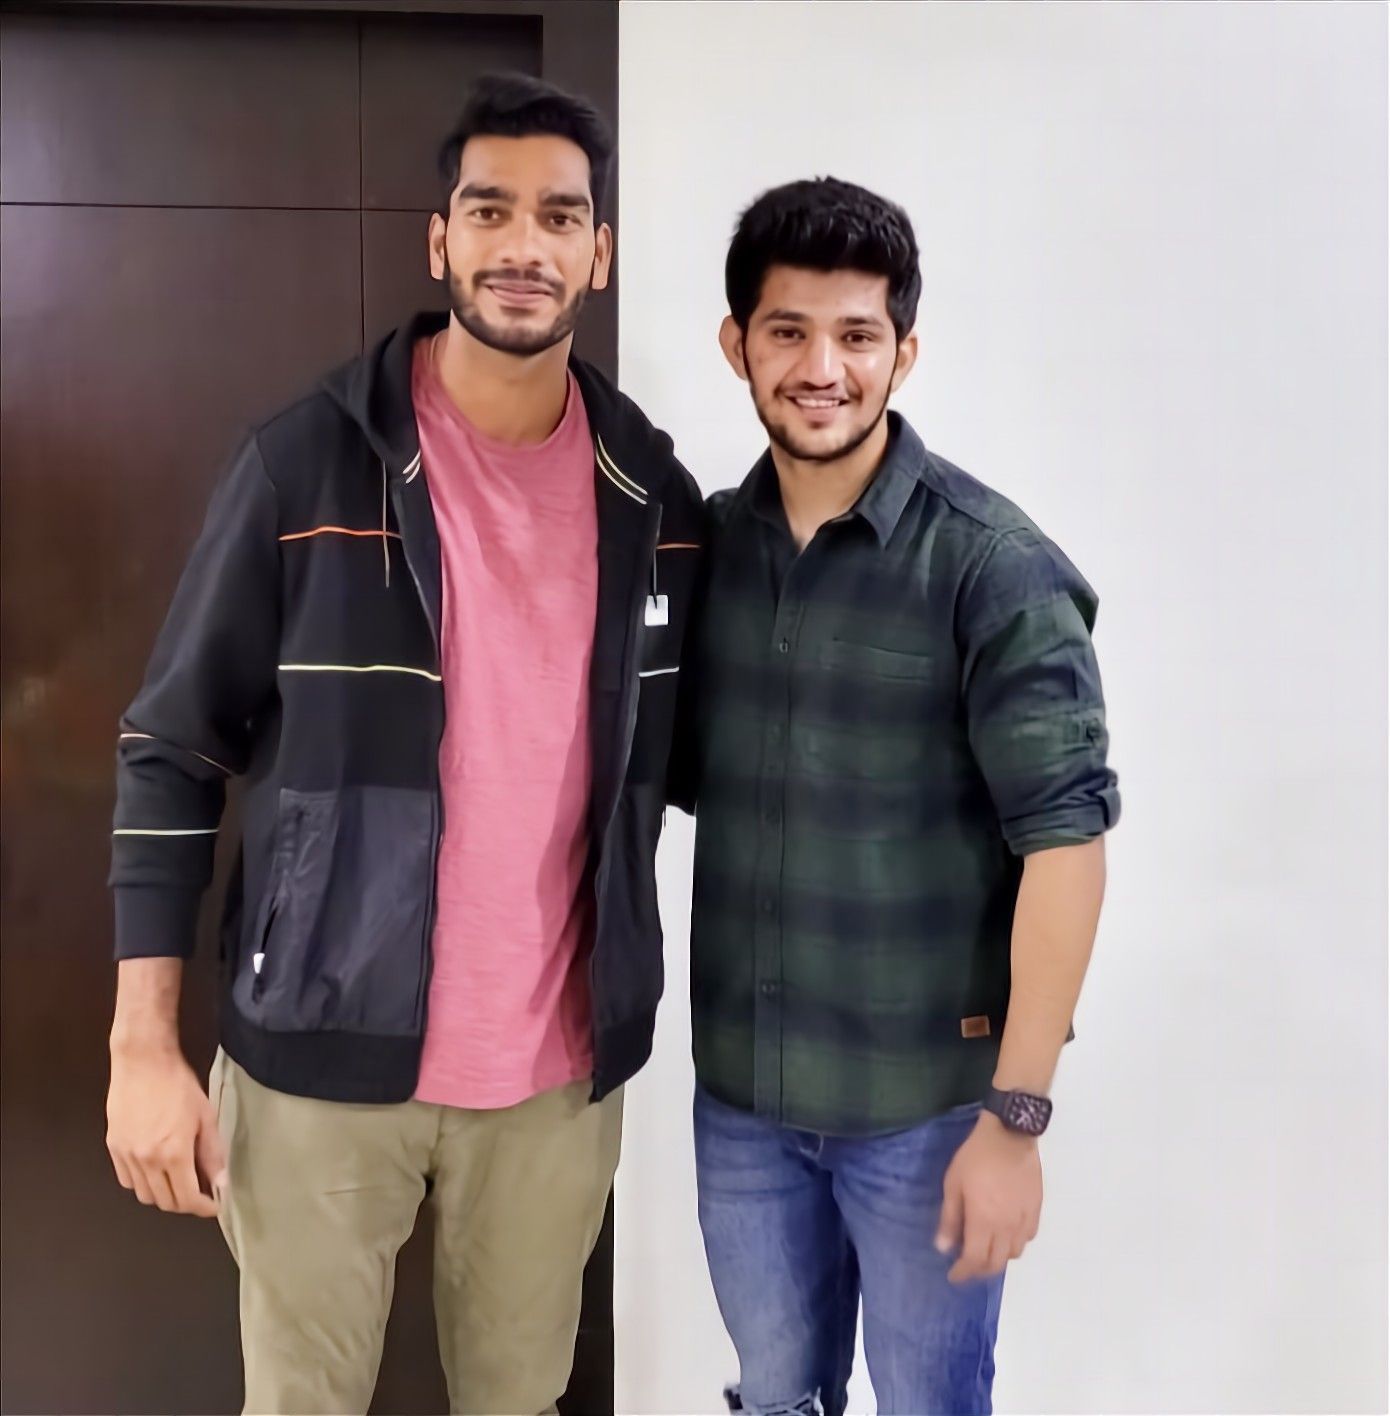 Besides growing up together, Suraj Thakuria (R) has also been serving as Venkatesh Iyer&#039;s (L) personal nutritionist [Credits: Suraj Thakuria]